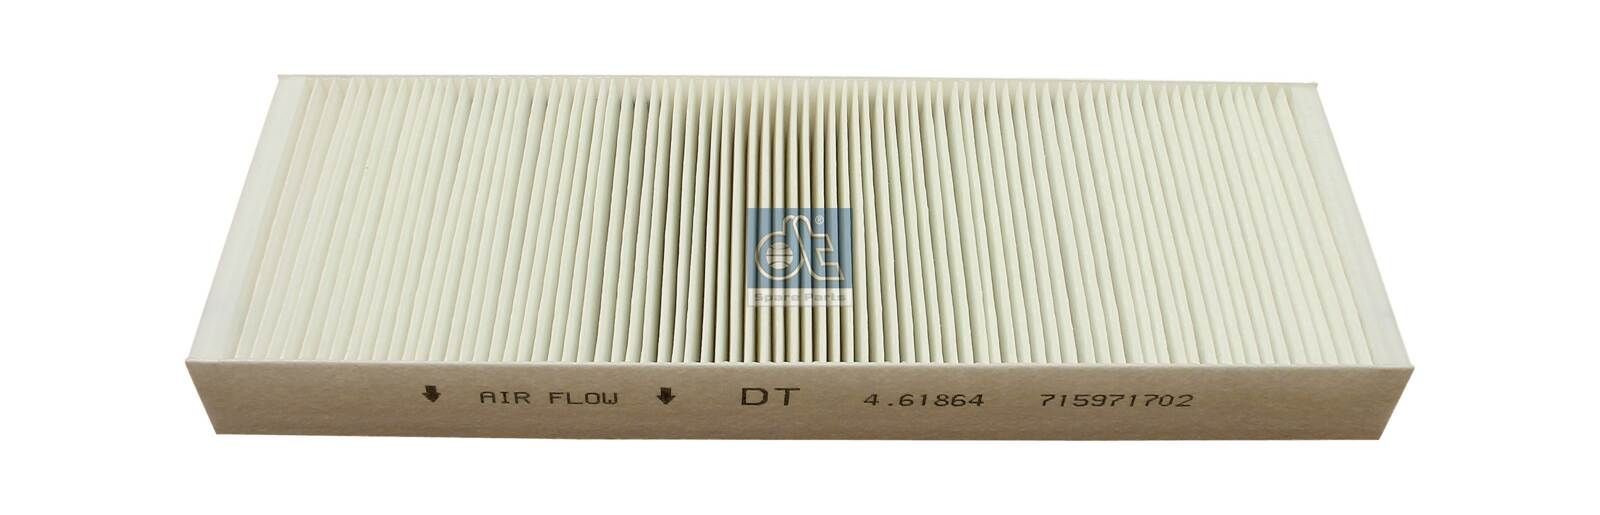 CU 3869 DT Spare Parts 4.61864 Air filter A0008301118